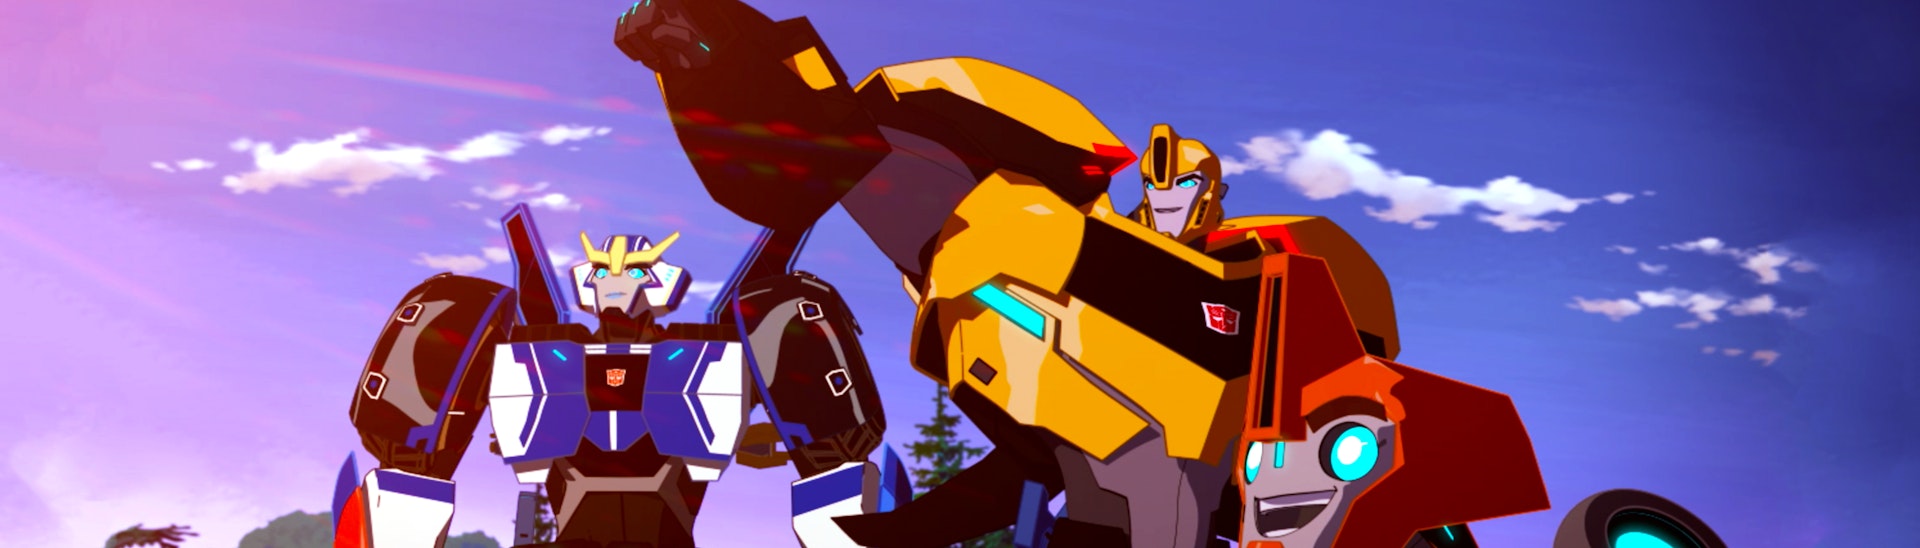 Watch Transformers Robots in Disguise | Episodes | TVNZ+